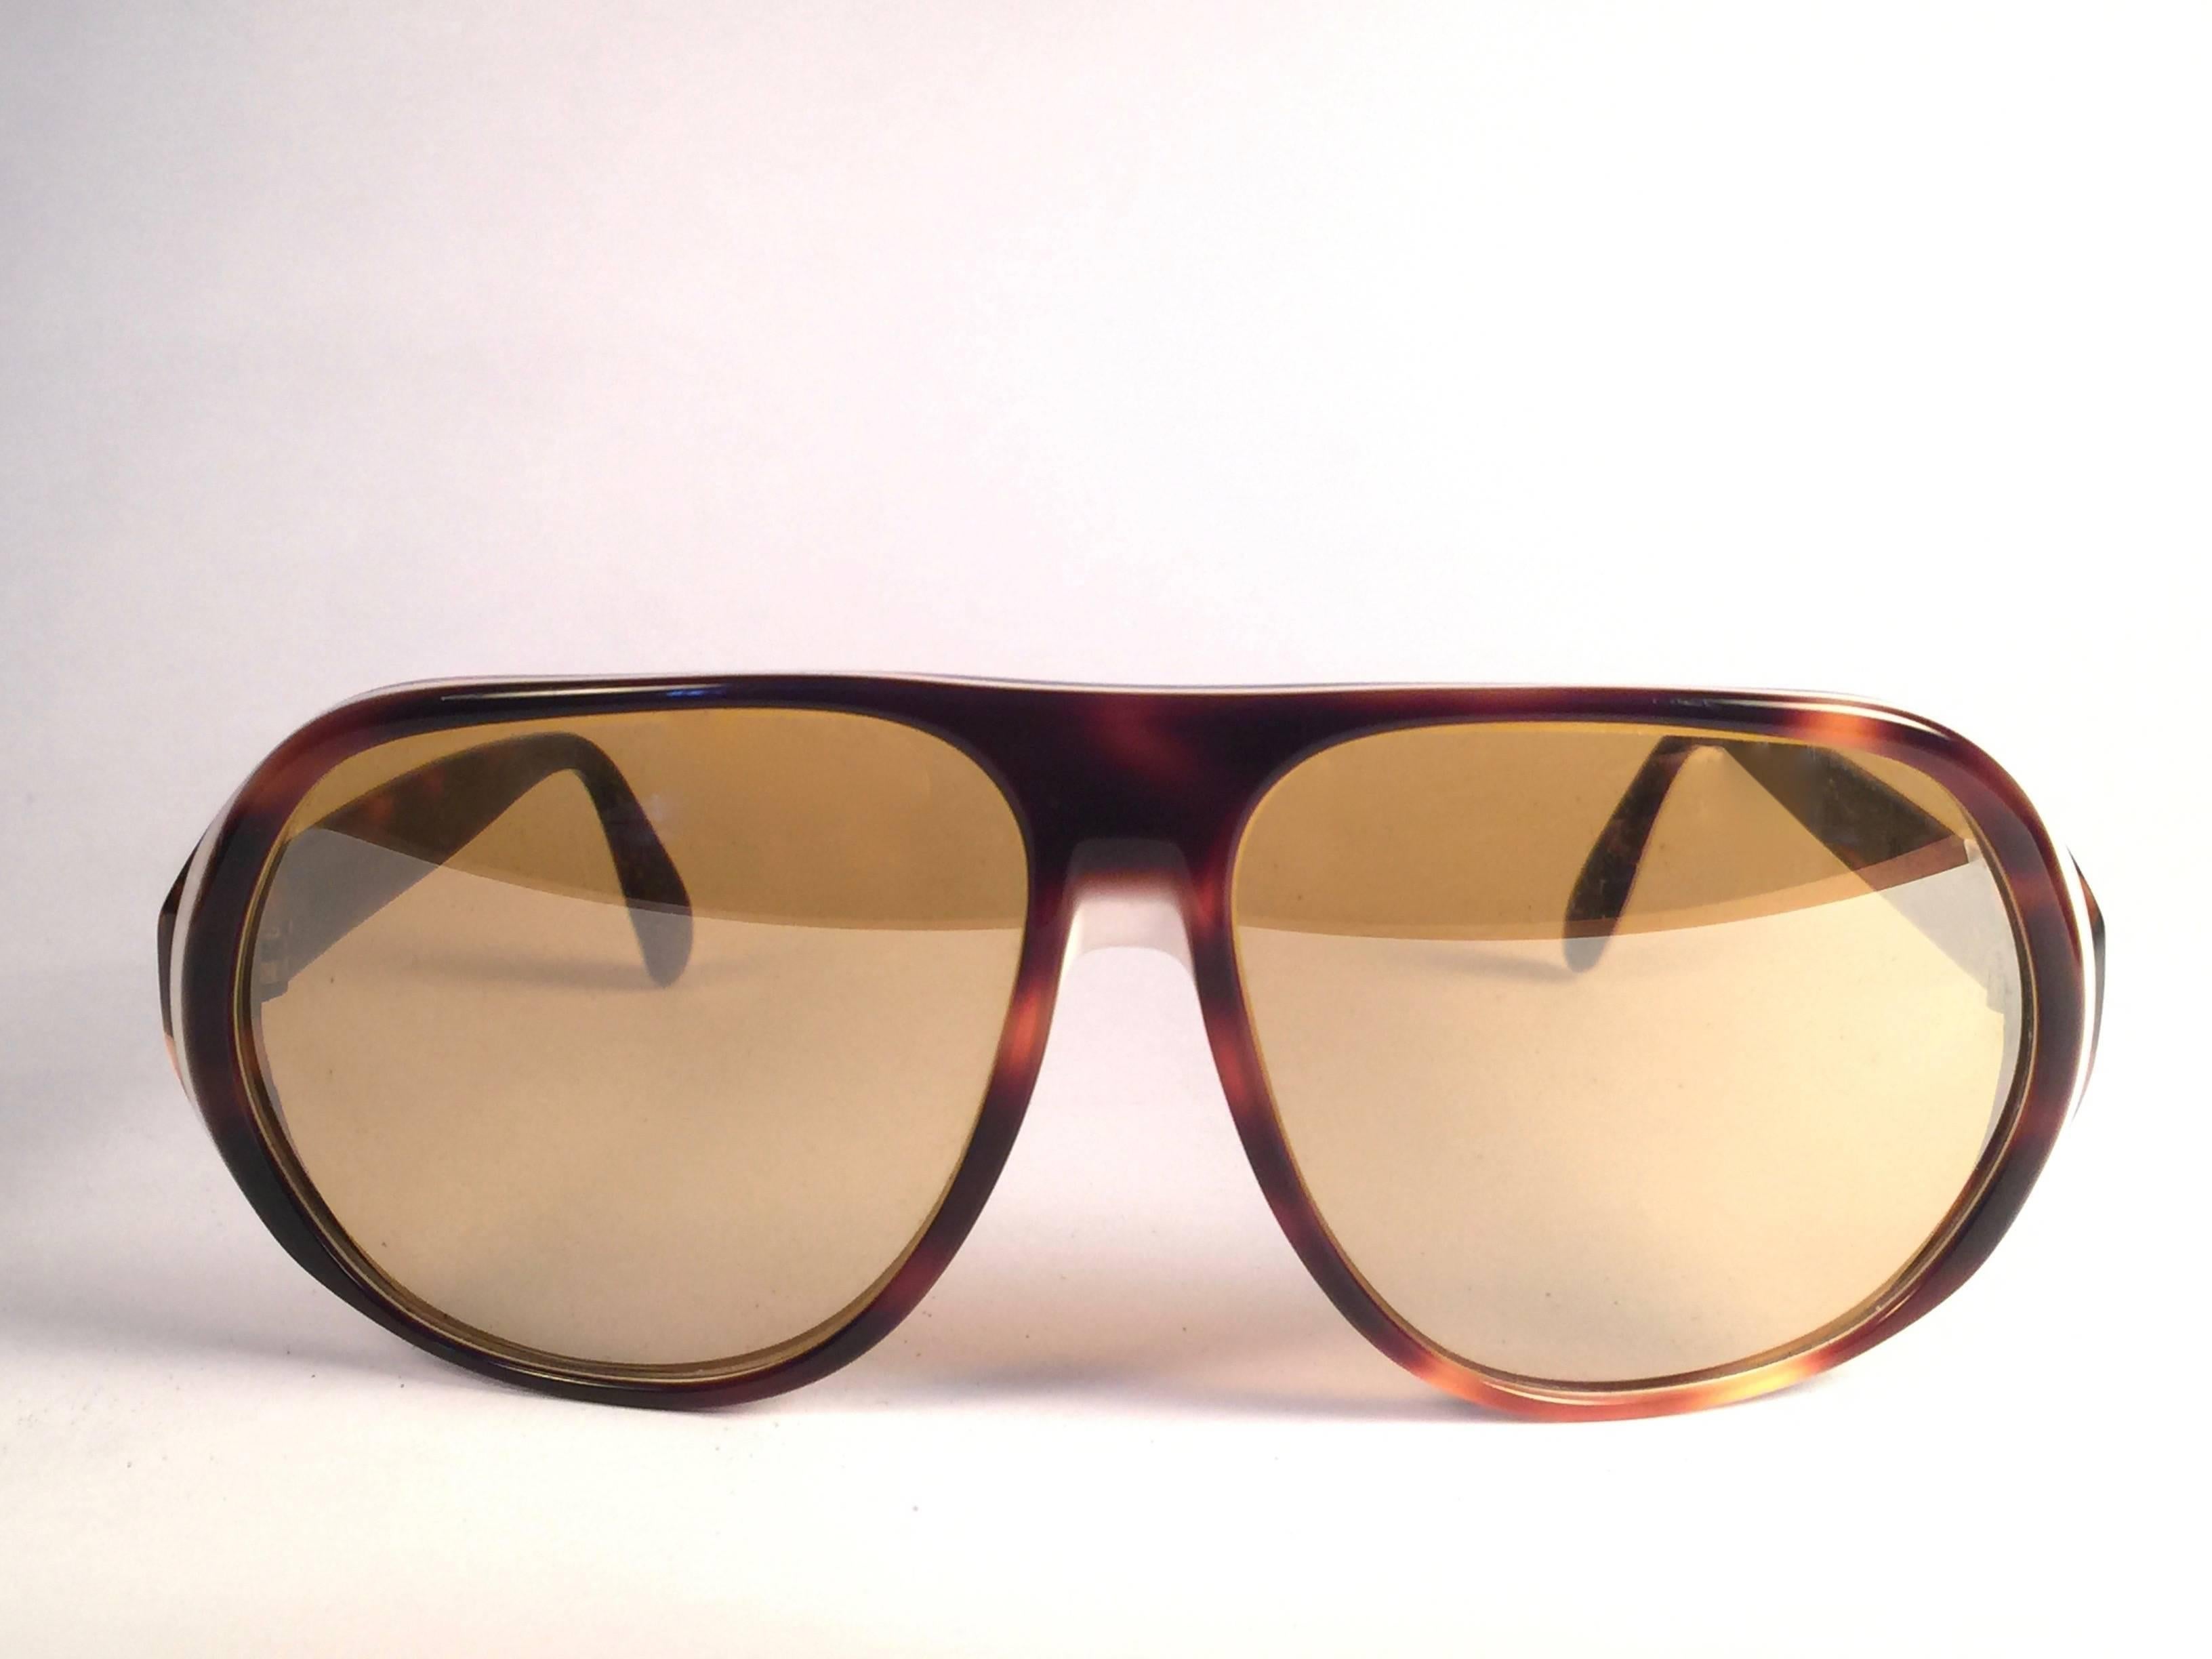 New and rare Vintage Blazer Tortoise and white frame holding a spotless of Ambermatic mirror pair of lenses.  
New, never worn or displayed.  
This pair may have minor sign of wear due to nearly 40 years of storage. Designed and Produced in USA.